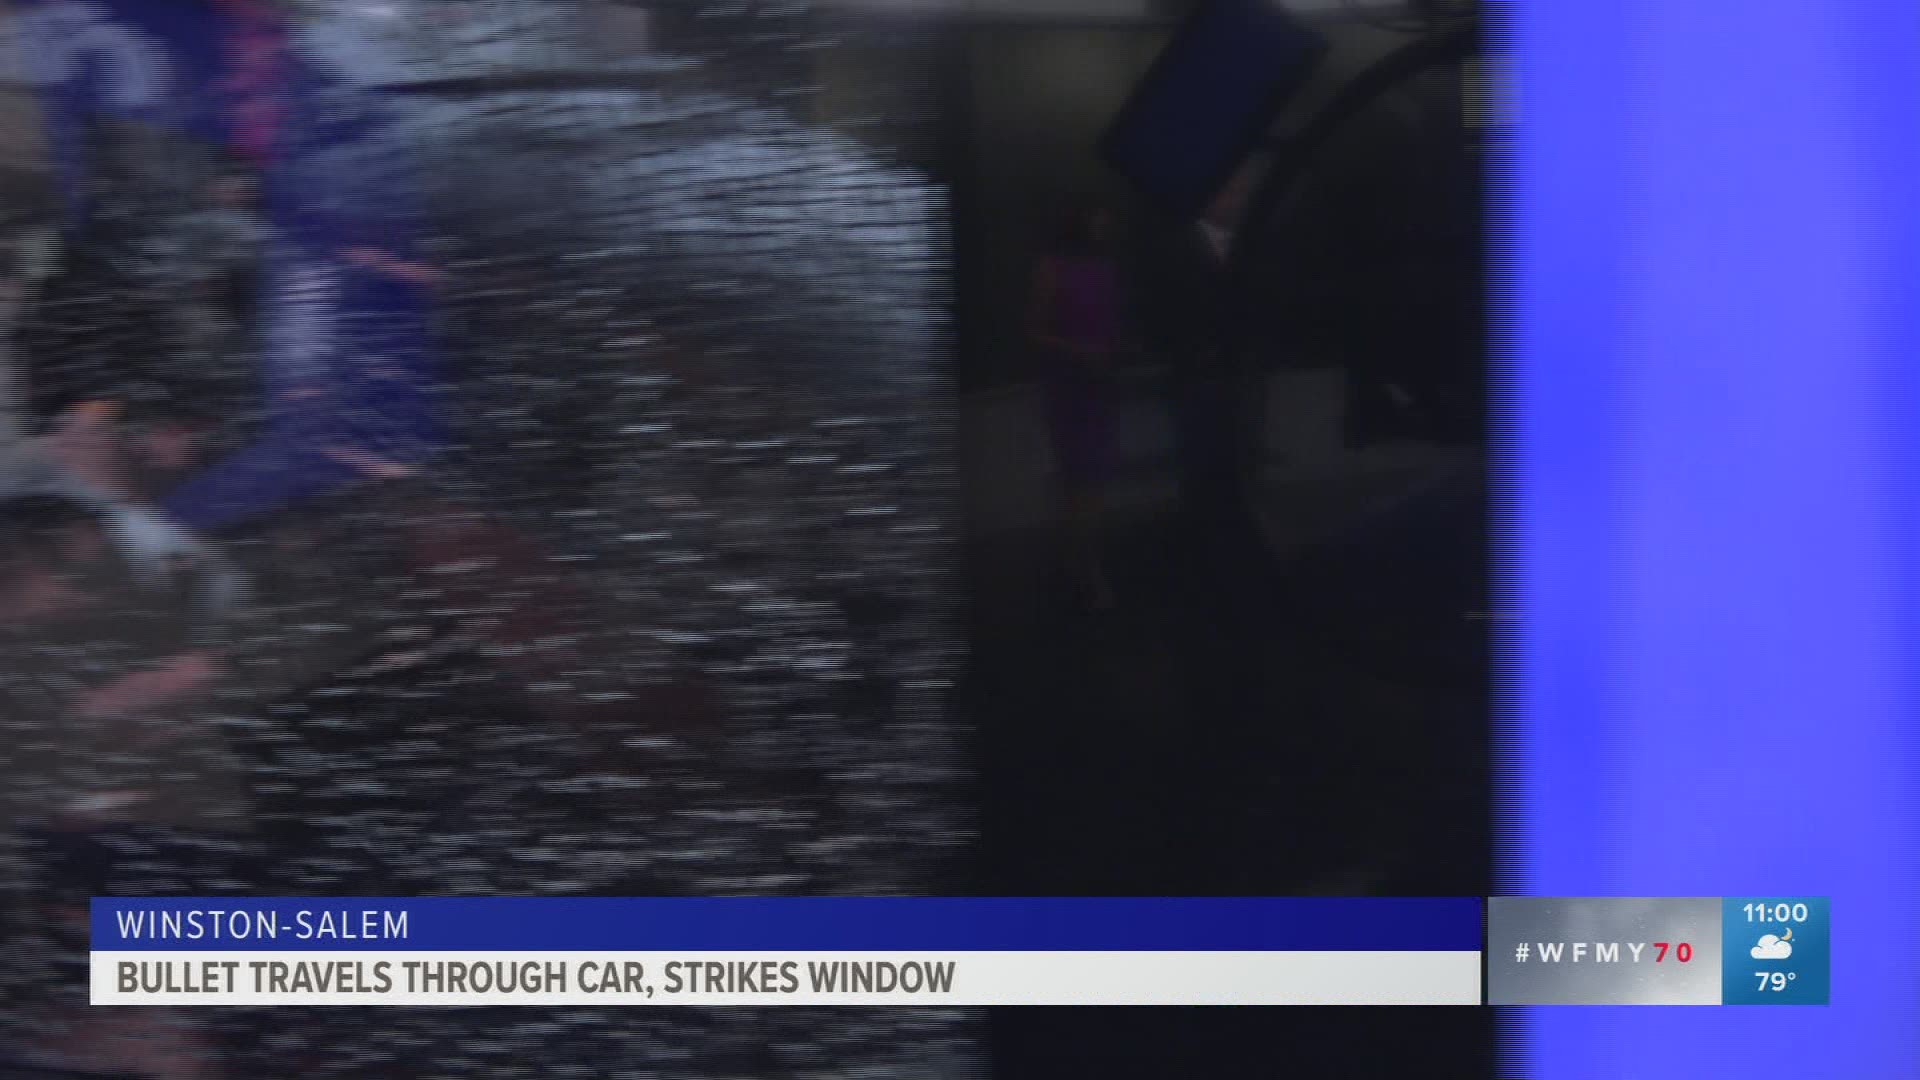 The woman was driving home from work when a bullet went through her window and shattered the passenger window.